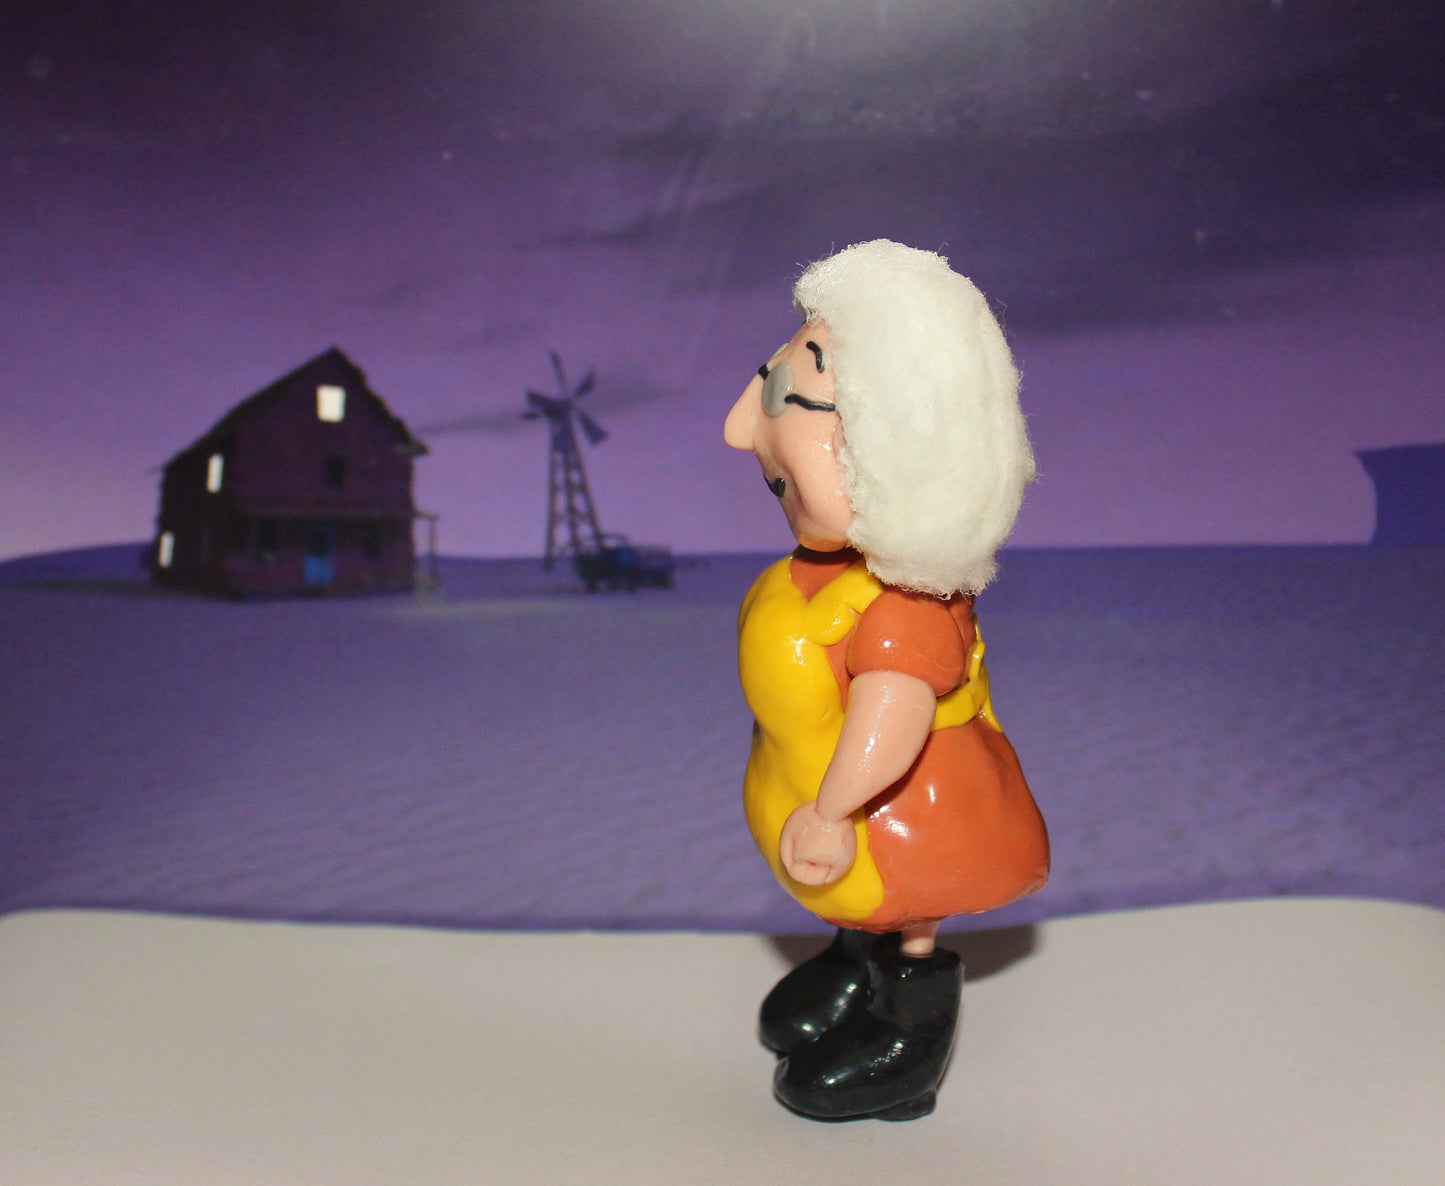 Courage the cowardly dog, Muriel Bagge, Eustace Bagge figure/ figurine/ collectable/ action figure